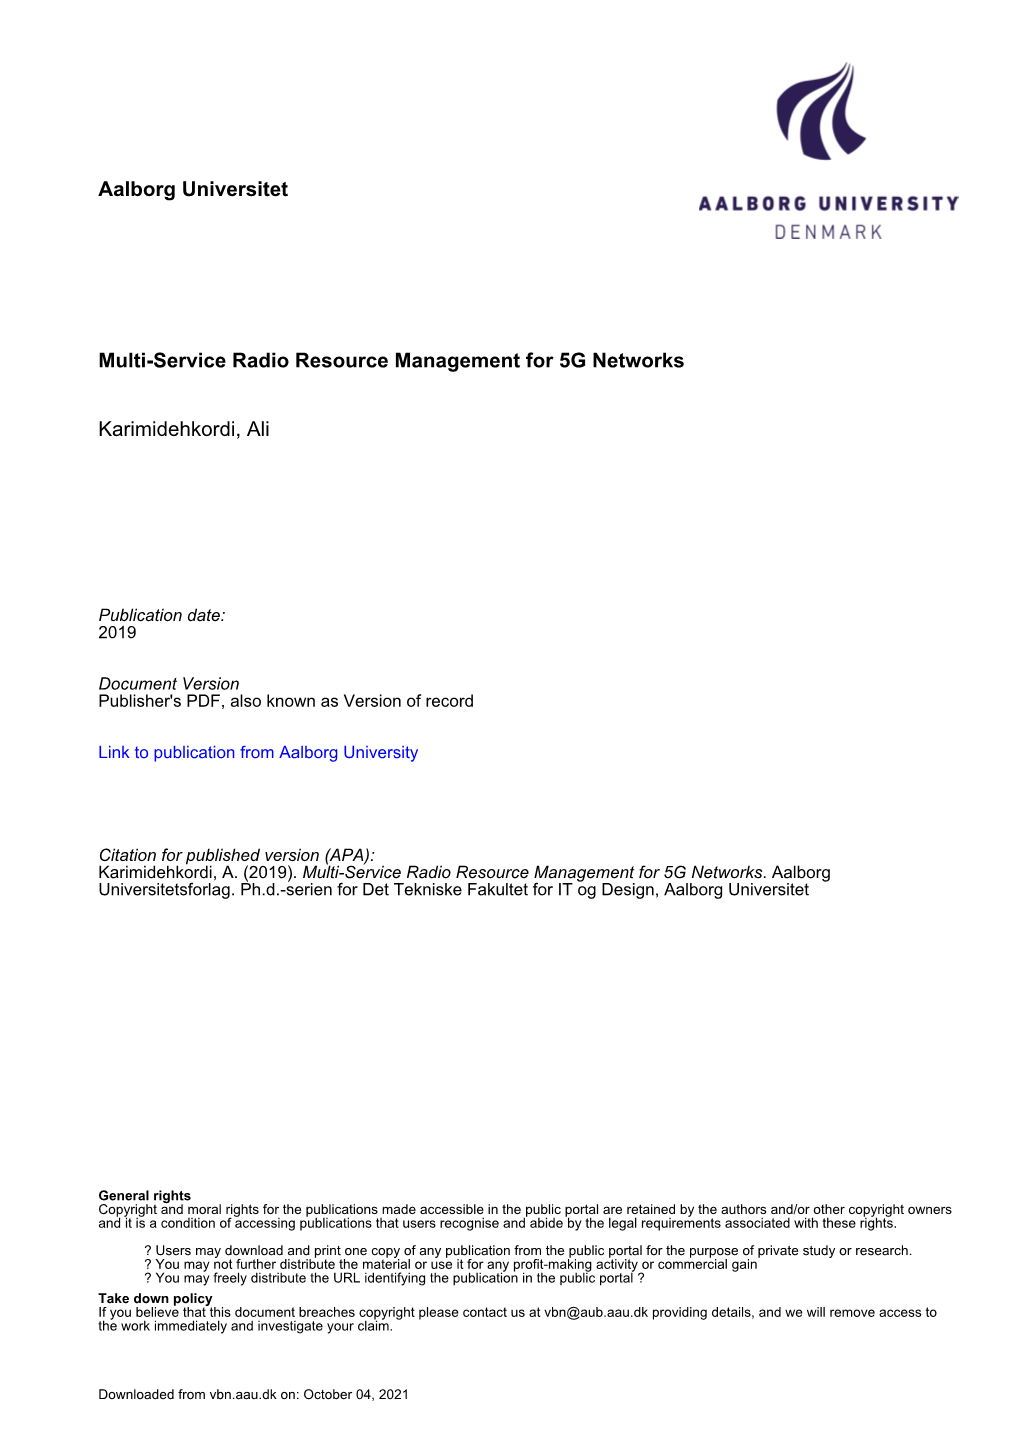 Multi-Service Radio Resource Management for 5G Networks